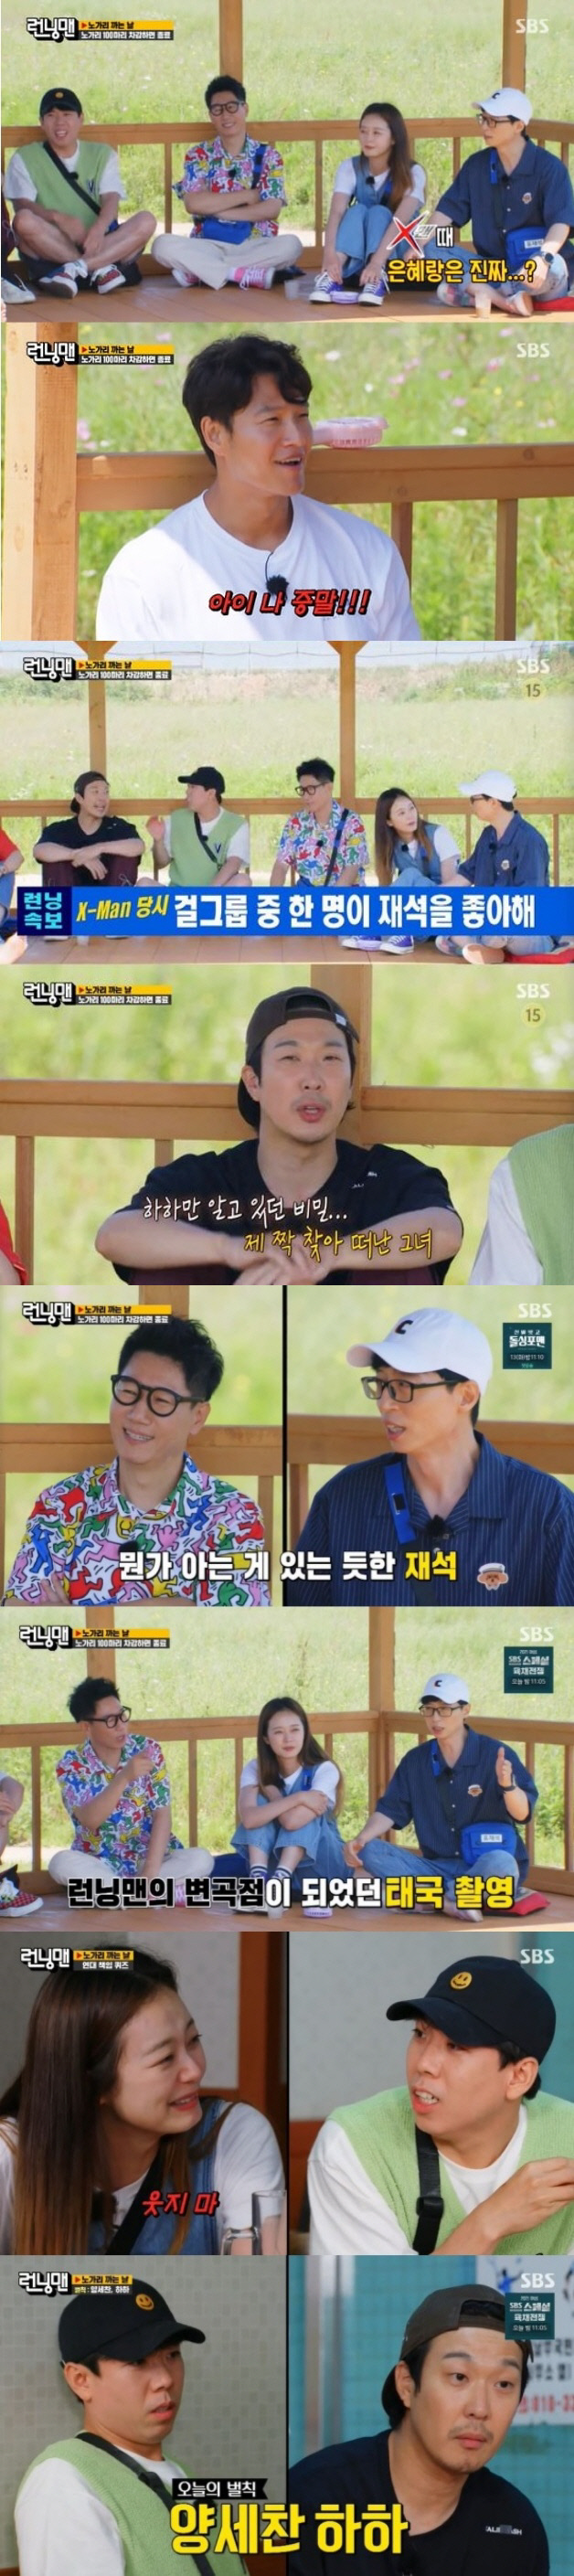 SBS Running Man created another legend with the talk of the members.Running Man, which aired on the 4th, recorded an average 3% of SBSs main target 2049 ratings (hereinafter based on Nielsen Korea metropolitan area and households), maintaining its solid first pRace in the same time zone, with an average TV viewer ratings of 5.8% and the highest TV viewer ratings per minute skyrocketing to 8.1%.The broadcast attracted attention with its new concept talk race We gon′ be alright Day, which allows you to leave work only when you constantly chat.This race, which was created to actively reflect the viewers opinion that members talk alone can make a single episode, was simply the production teams Hansu of God.The We gon′ be alright Day race is a mission to deduct 100 We gon′ be alright, and We gon′ be alright can be deducted if you chat without silence for 10 minutes.If you stop talking for more than 10 seconds, two We Gon′ Be Alright are added. The members poured out the talk bomb from the beginning and were interested in various behind-the-scenes talk that could not be heard anywhere.Haha recalled the days of X-Men and revealed that one of the girl groups liked Yoo Jae-Suk.Yoo Jae-Suk said, I have never received a dash, but Kim Jong-guk said, It is a straight image now, but there was a little bit of a slap when I was banging.Yoo Jae-Suk brought up the story that made up the members of the present at the early stage of the Running Man project.Yoo Jae-Suk said, When I came to Song Ji-hyo as a guest of Fang-a, I said Ill be tired and go to rest, but I did not start recording.I was the first candidate for the member because of that appearance, he said. Ji Suk-jin was careful because I was close.I remember the production team asking for their opinions and telling them as objectively and coolly as possible.Song Ji-hyo mentioned Lee Kwang-soo during the early days of Running Man, and Song Ji-hyo said, I was a woman, so I could not easily get along with my brothers in the early days.At that time, I thought a little I am so excited and said, Do not call me. I did not get a phone call. In addition, Jeon So-min started his special talent, Love Talk, and recently surprised everyone by mentioning Thumbnam and saying that he was a young man. Recently, he said, I suddenly walked to the side.I was active, so I asked him to walk home with me, and we walked too long. I said, Go away. I surprised everyone by revealing that I was younger and younger.The members made a lot of the past class with the talk that made the production team tired, and in the meantime, Yang Se-chan and Haha were decided as final penalties.The scene was the highest TV viewer ratings of 8.1% per minute, accounting for the best one minute.